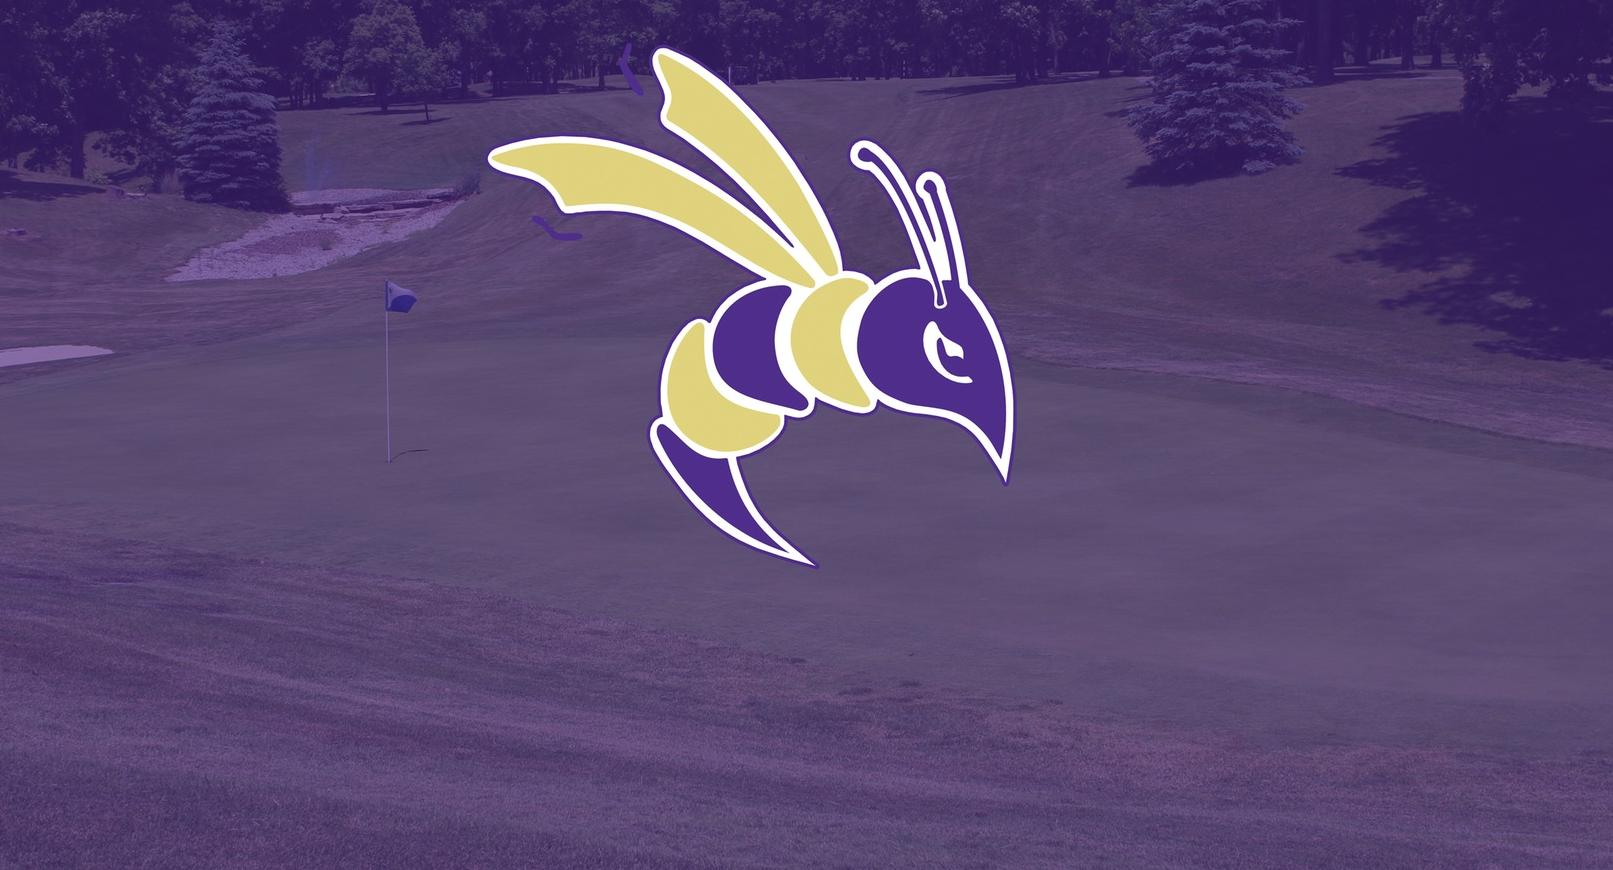 Clingaman Leads DC at the Defiance Fall Invitational